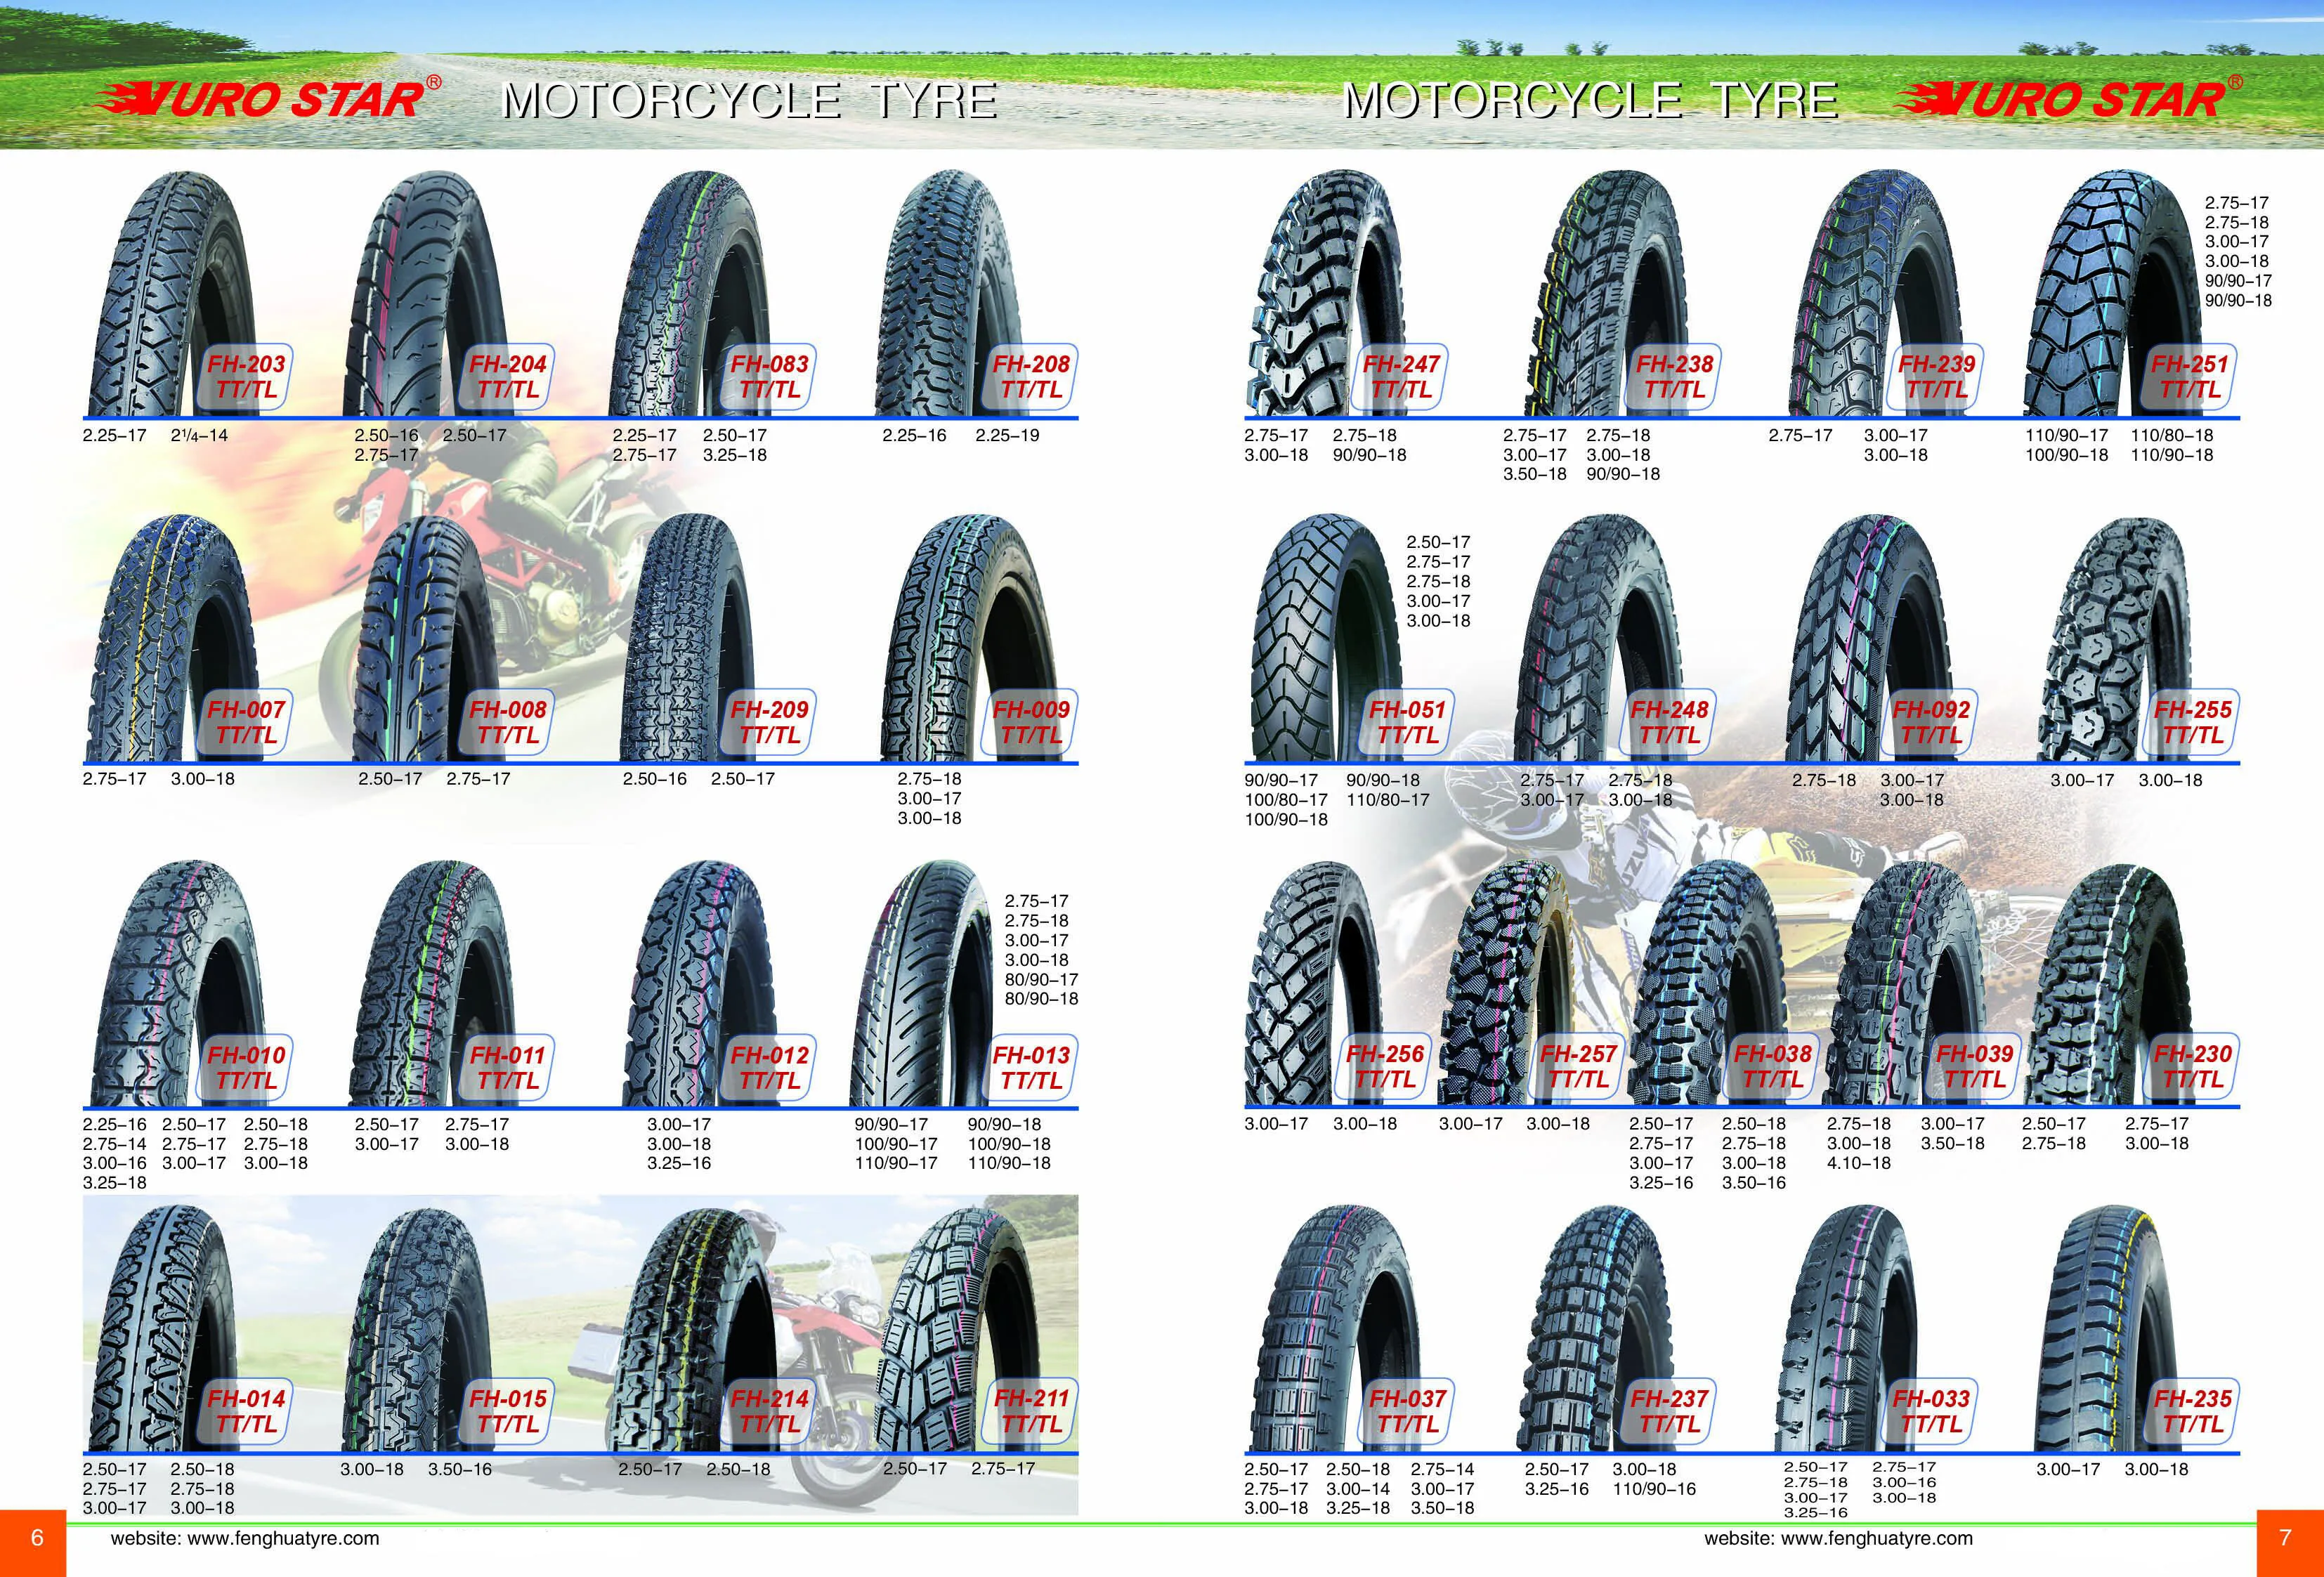 
Pupular pattern in Philippine for 3.00-17 motorcycle tyre motorcycle tyres 